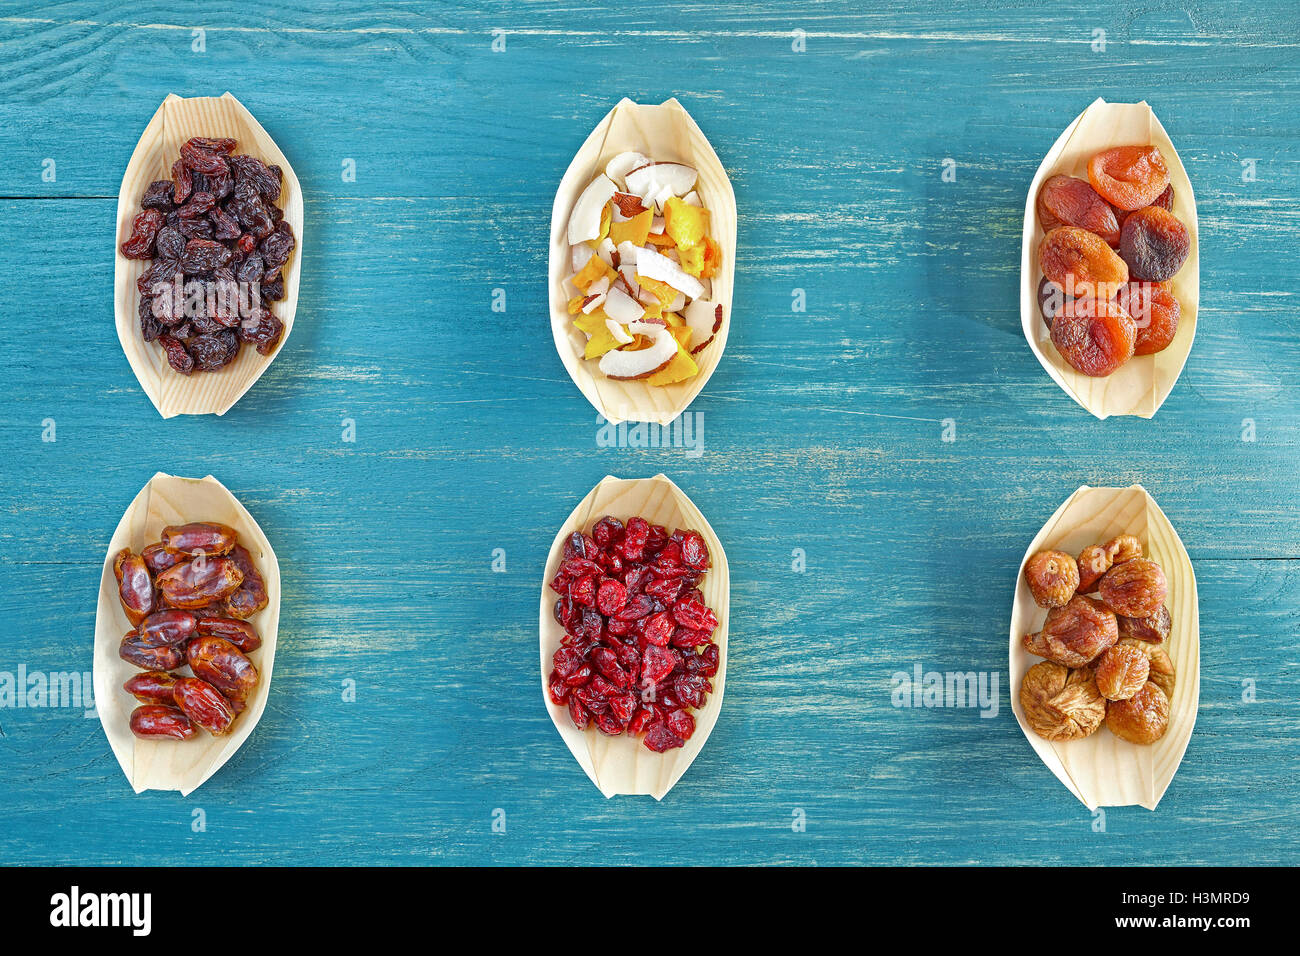 Dried fruits selection in wooden bowls on blue rustic table, view from above. Stock Photo